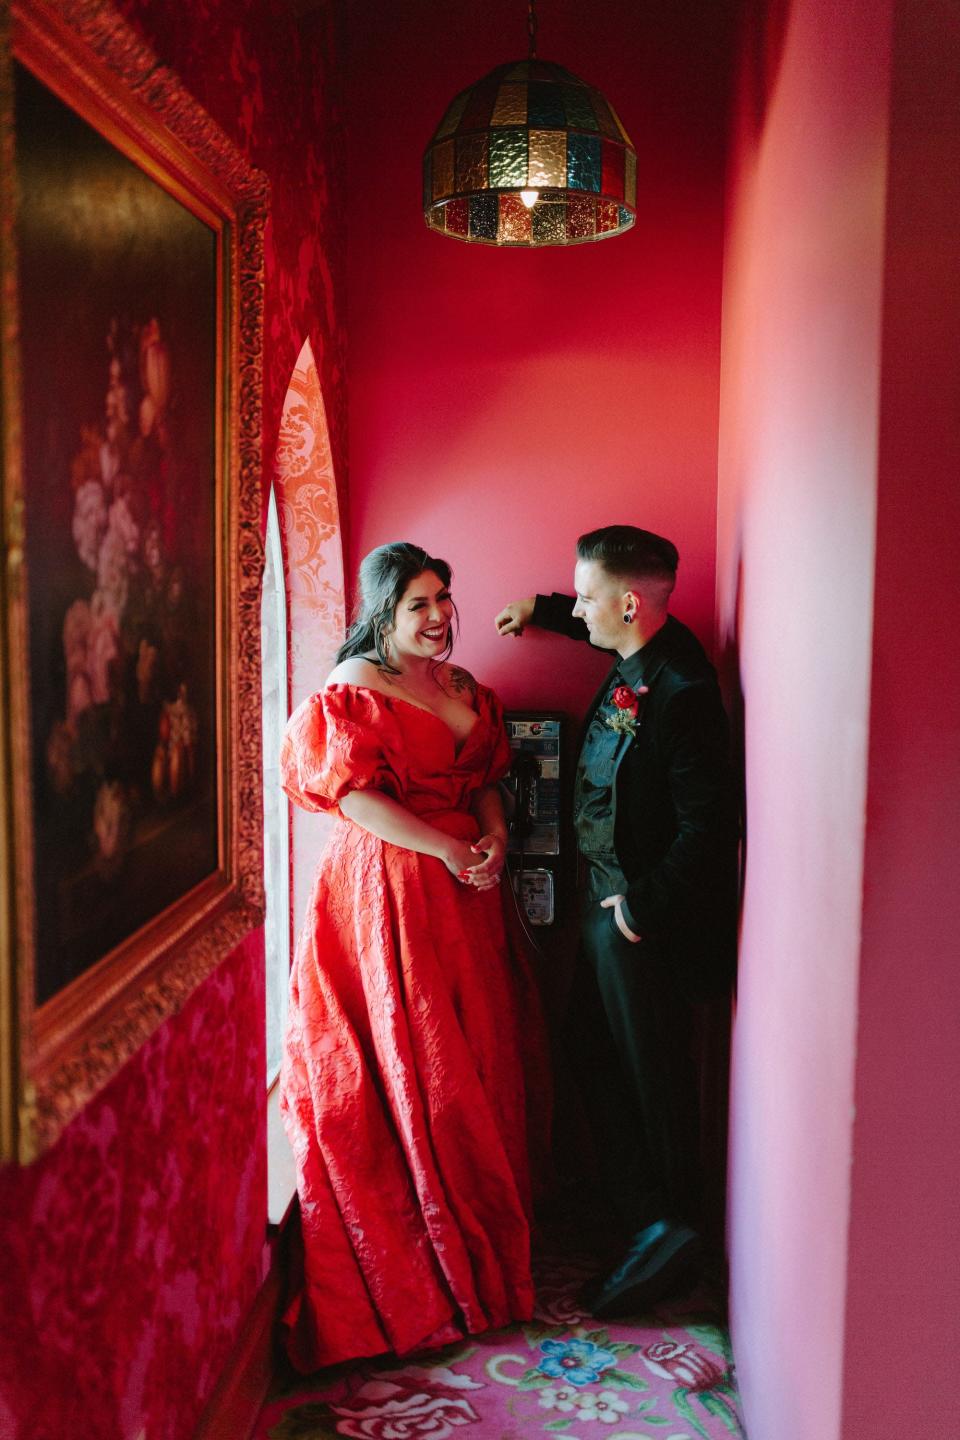 A man in a black suit and a woman in a red dress look at each other in a red hallway.